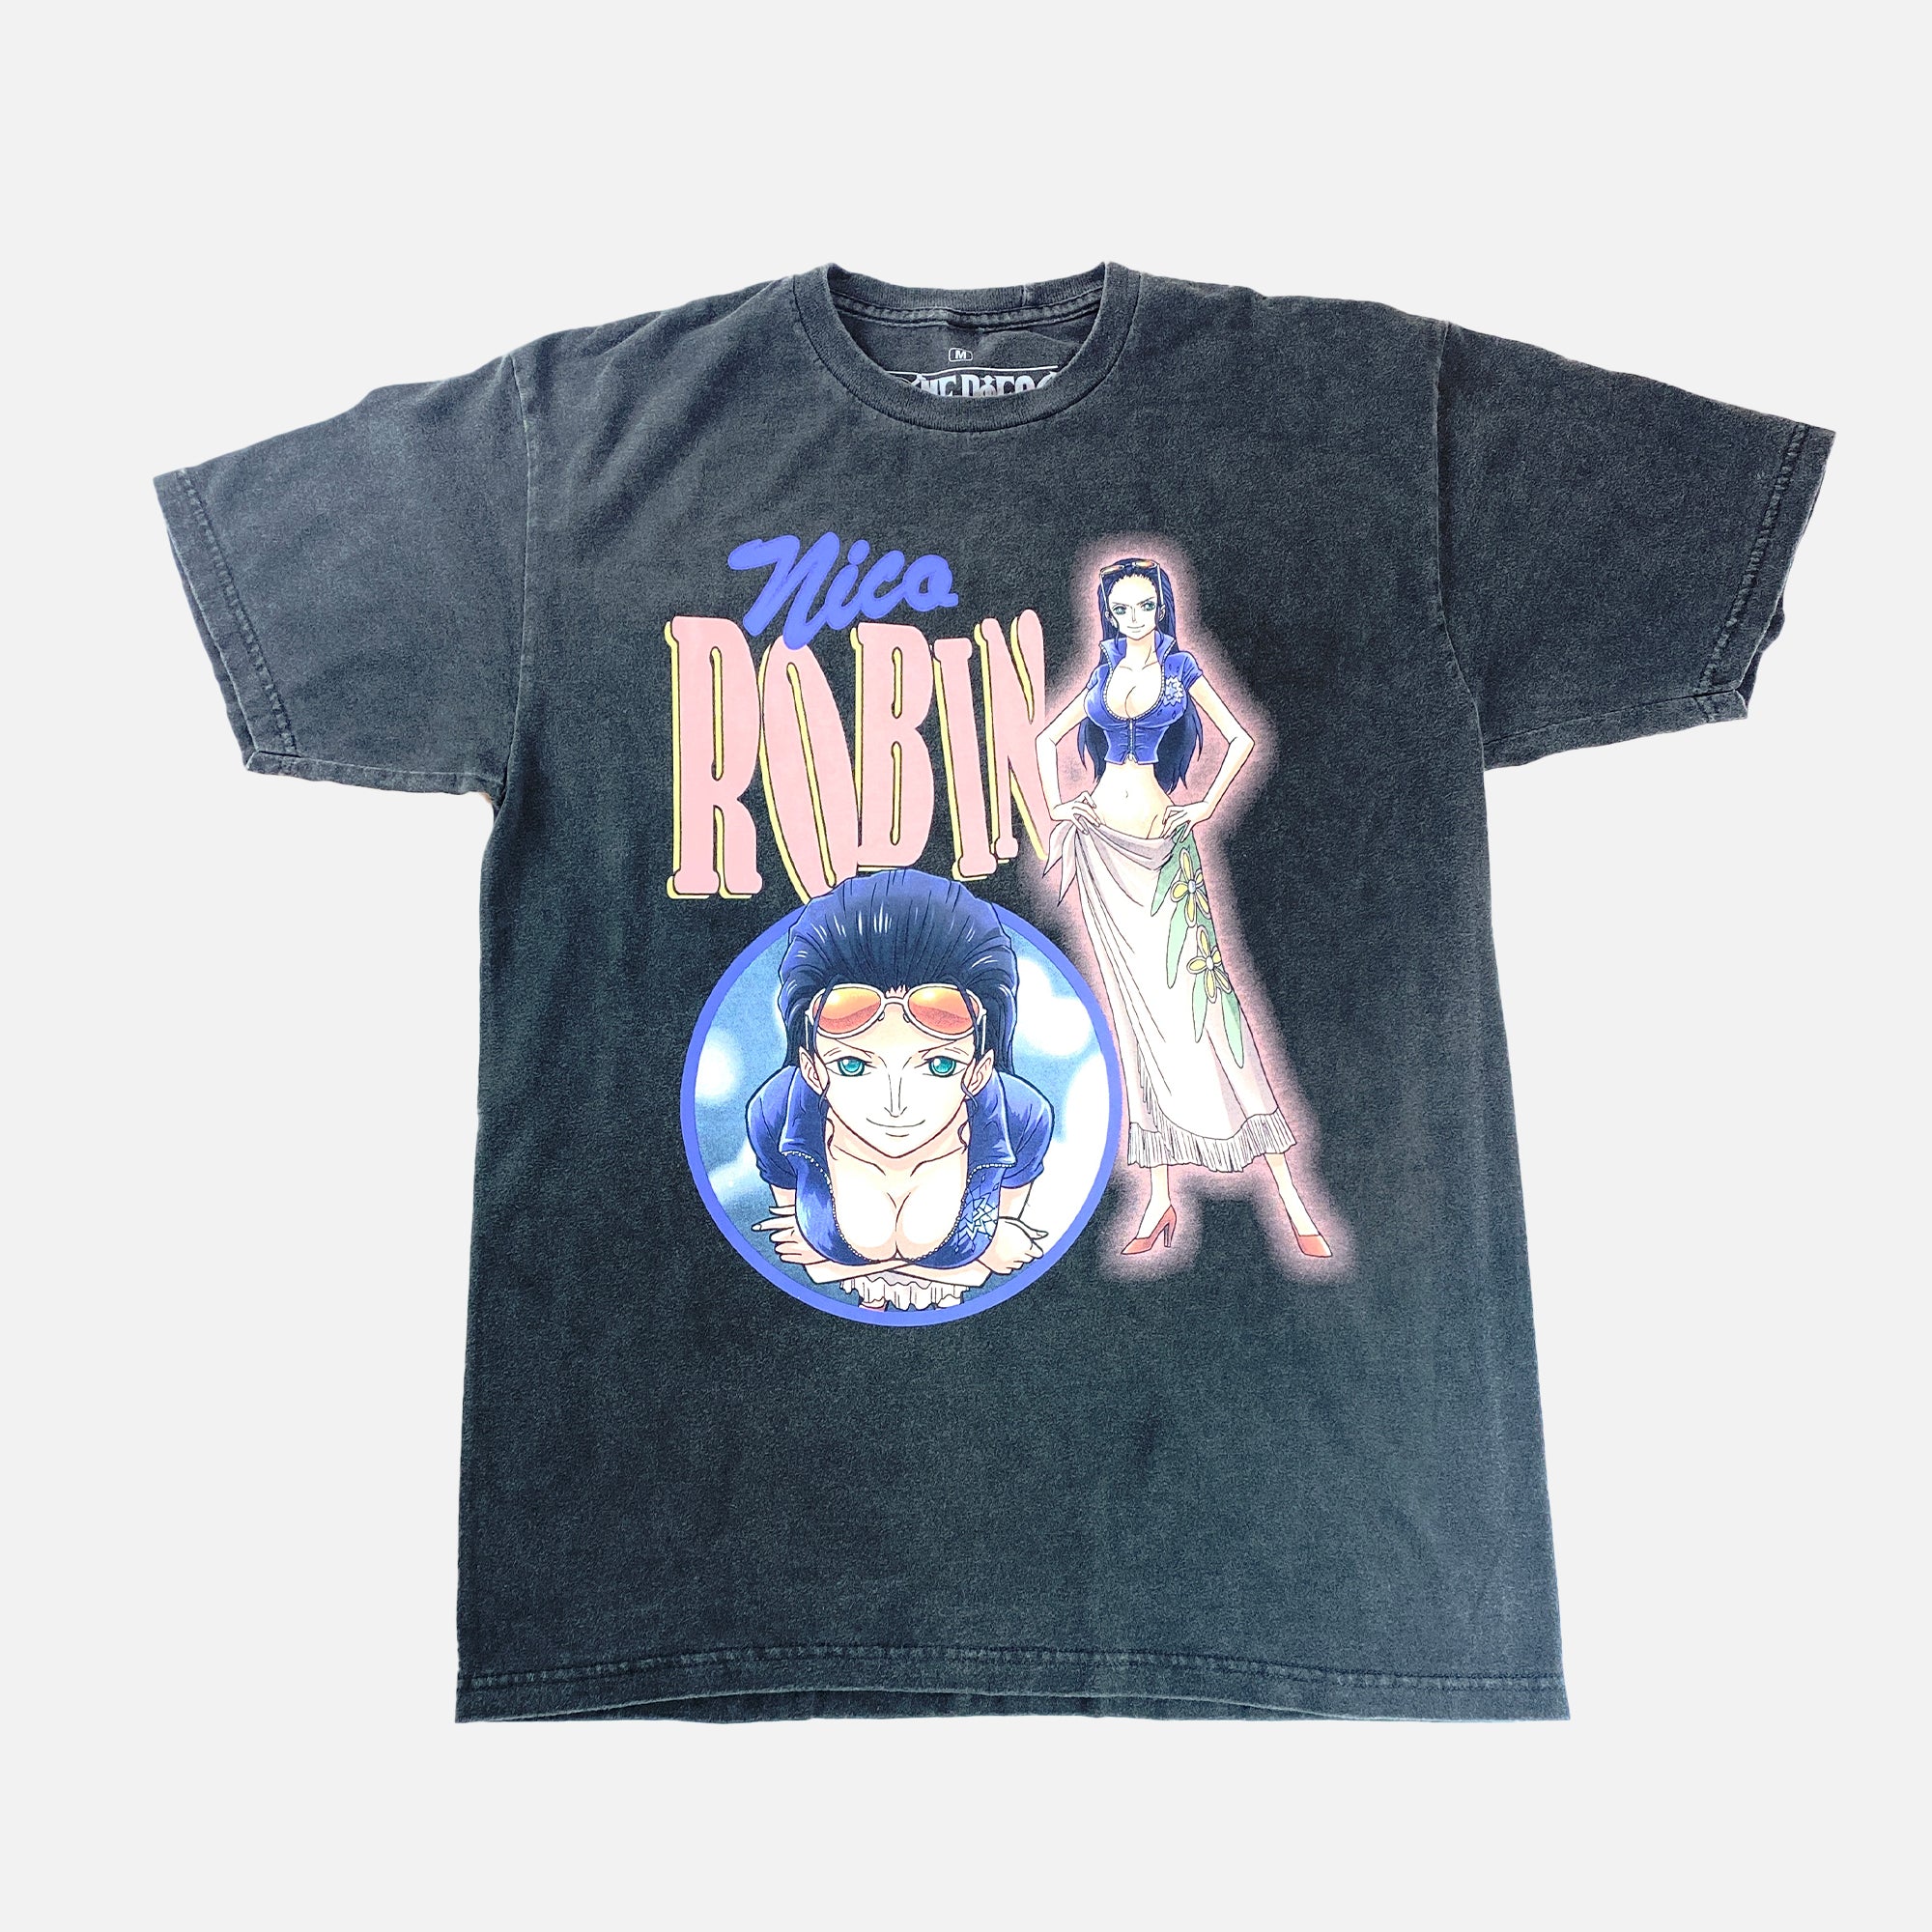 One Piece - Nico Robin 90's T-Shirt - Crunchyroll Exclusive! image count 0